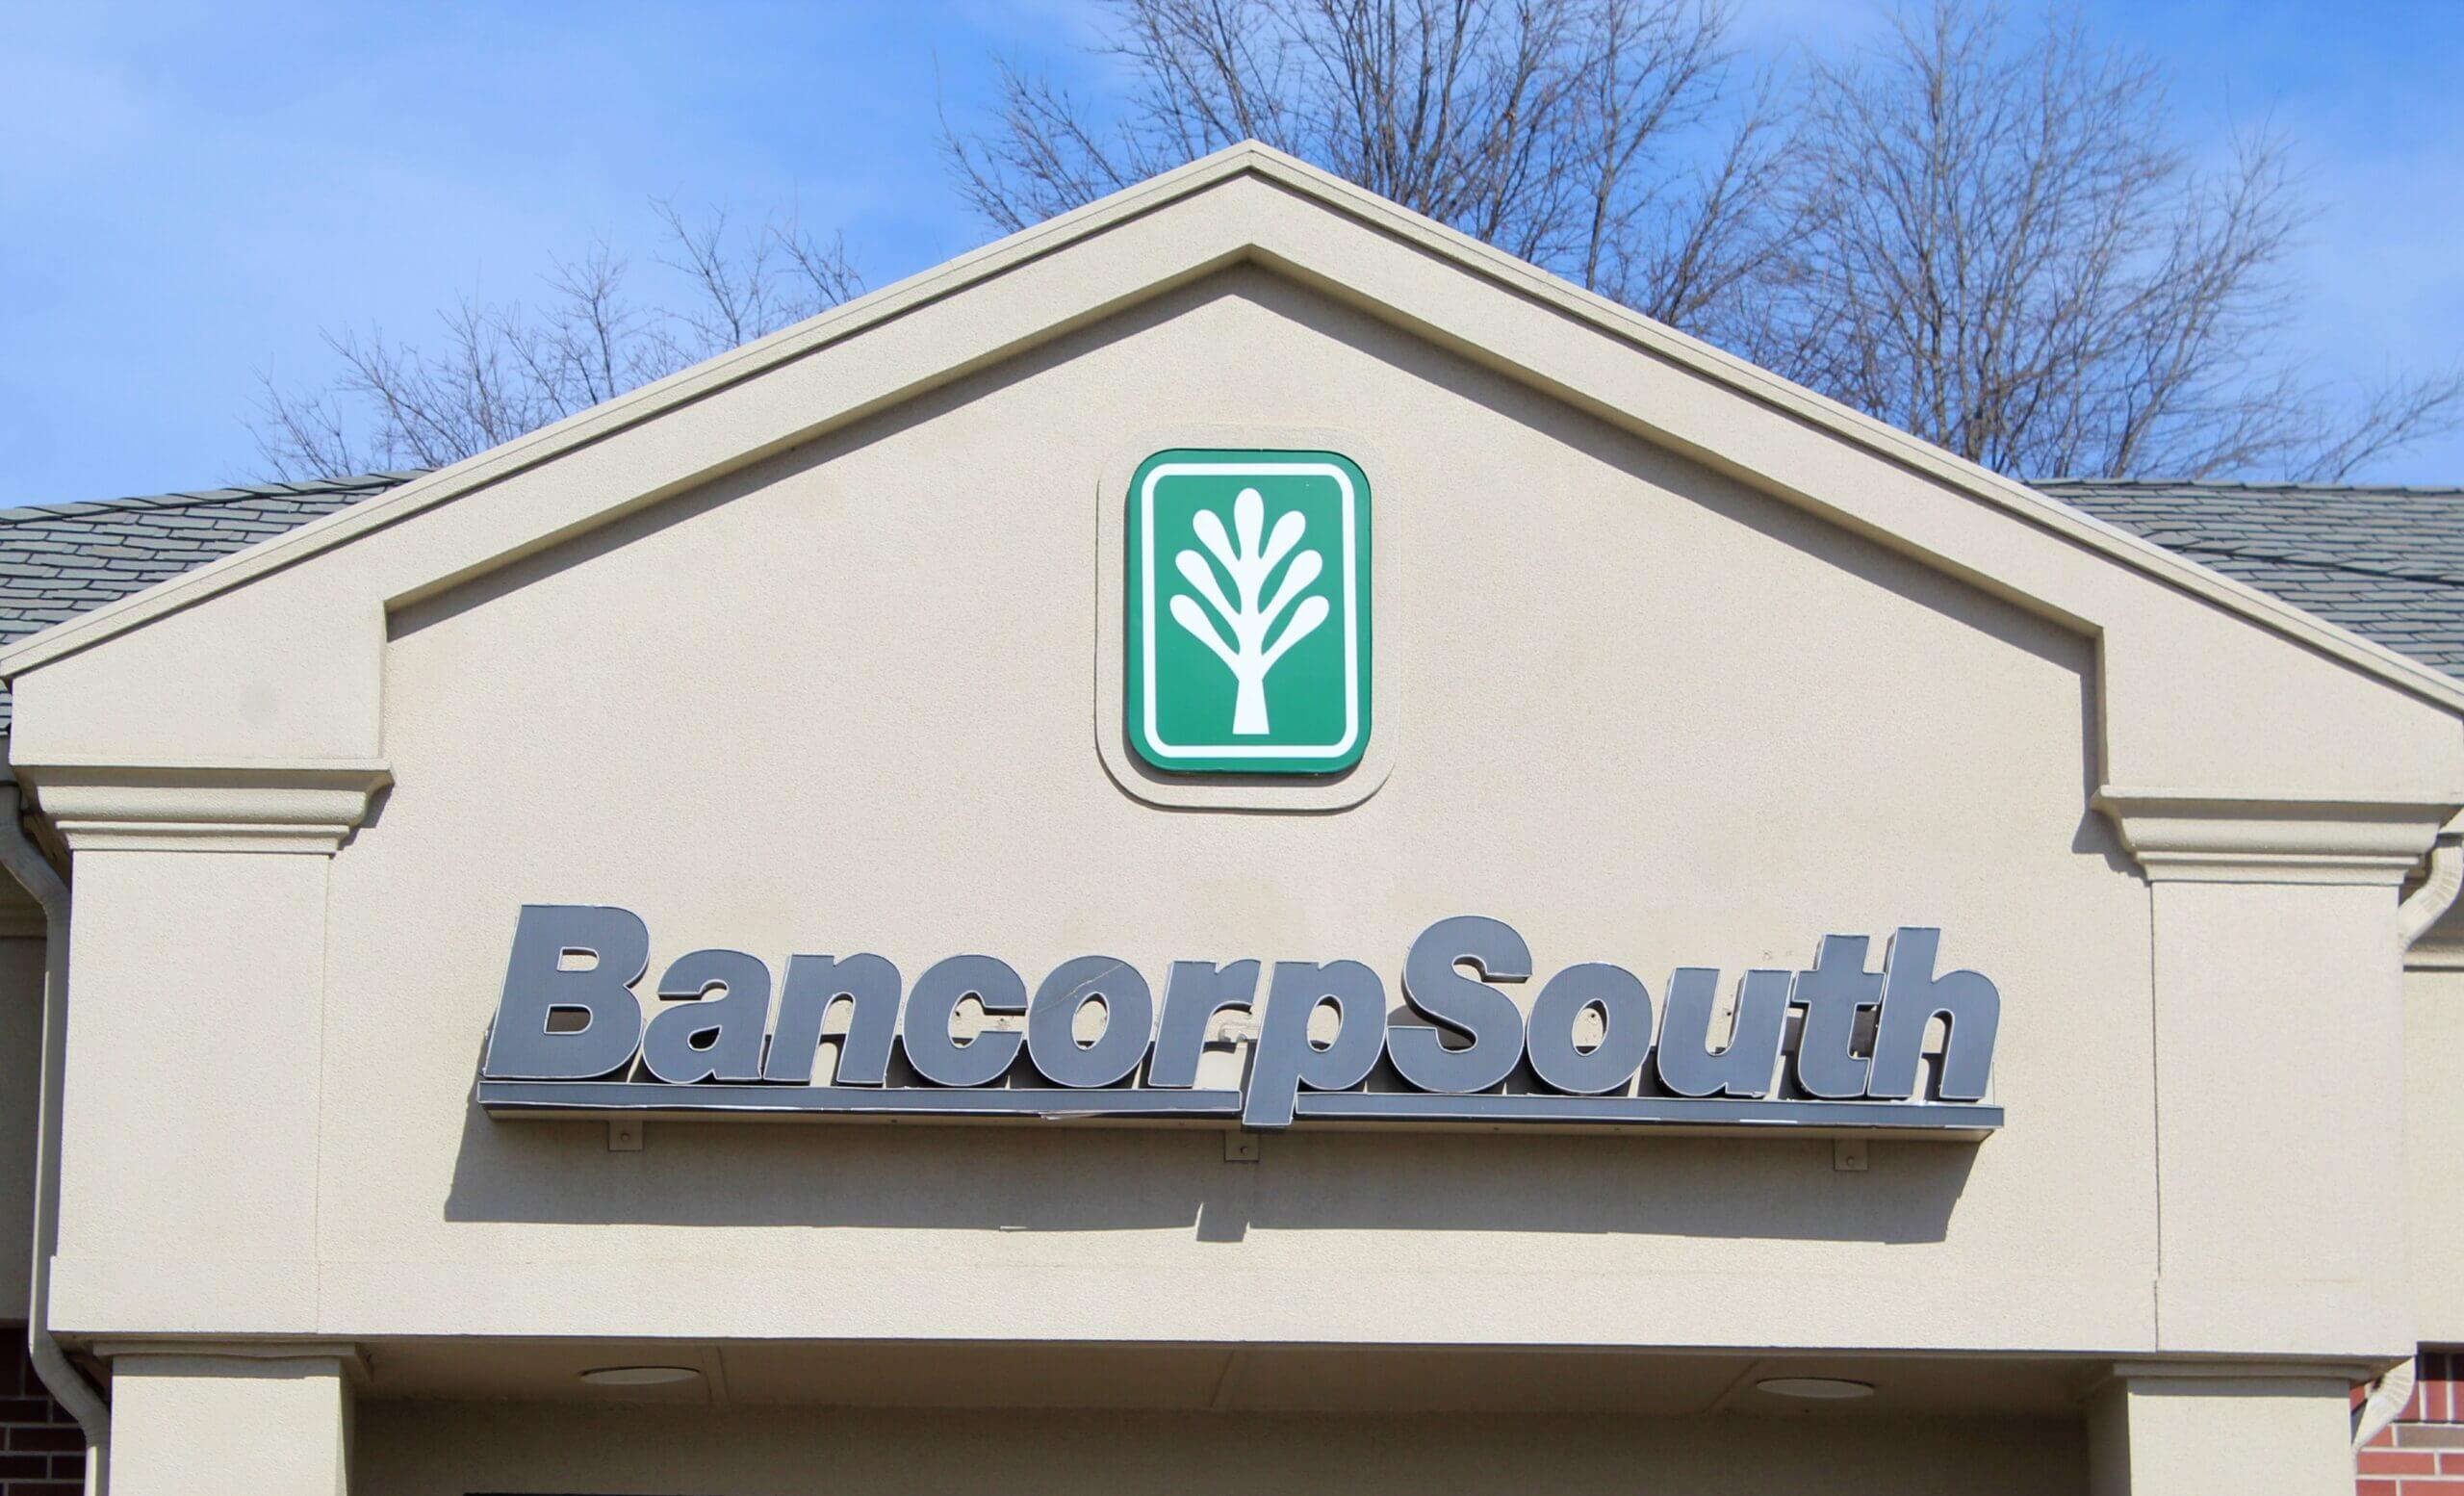 BancorpSouth to merge with FNS Bancshares Inc.